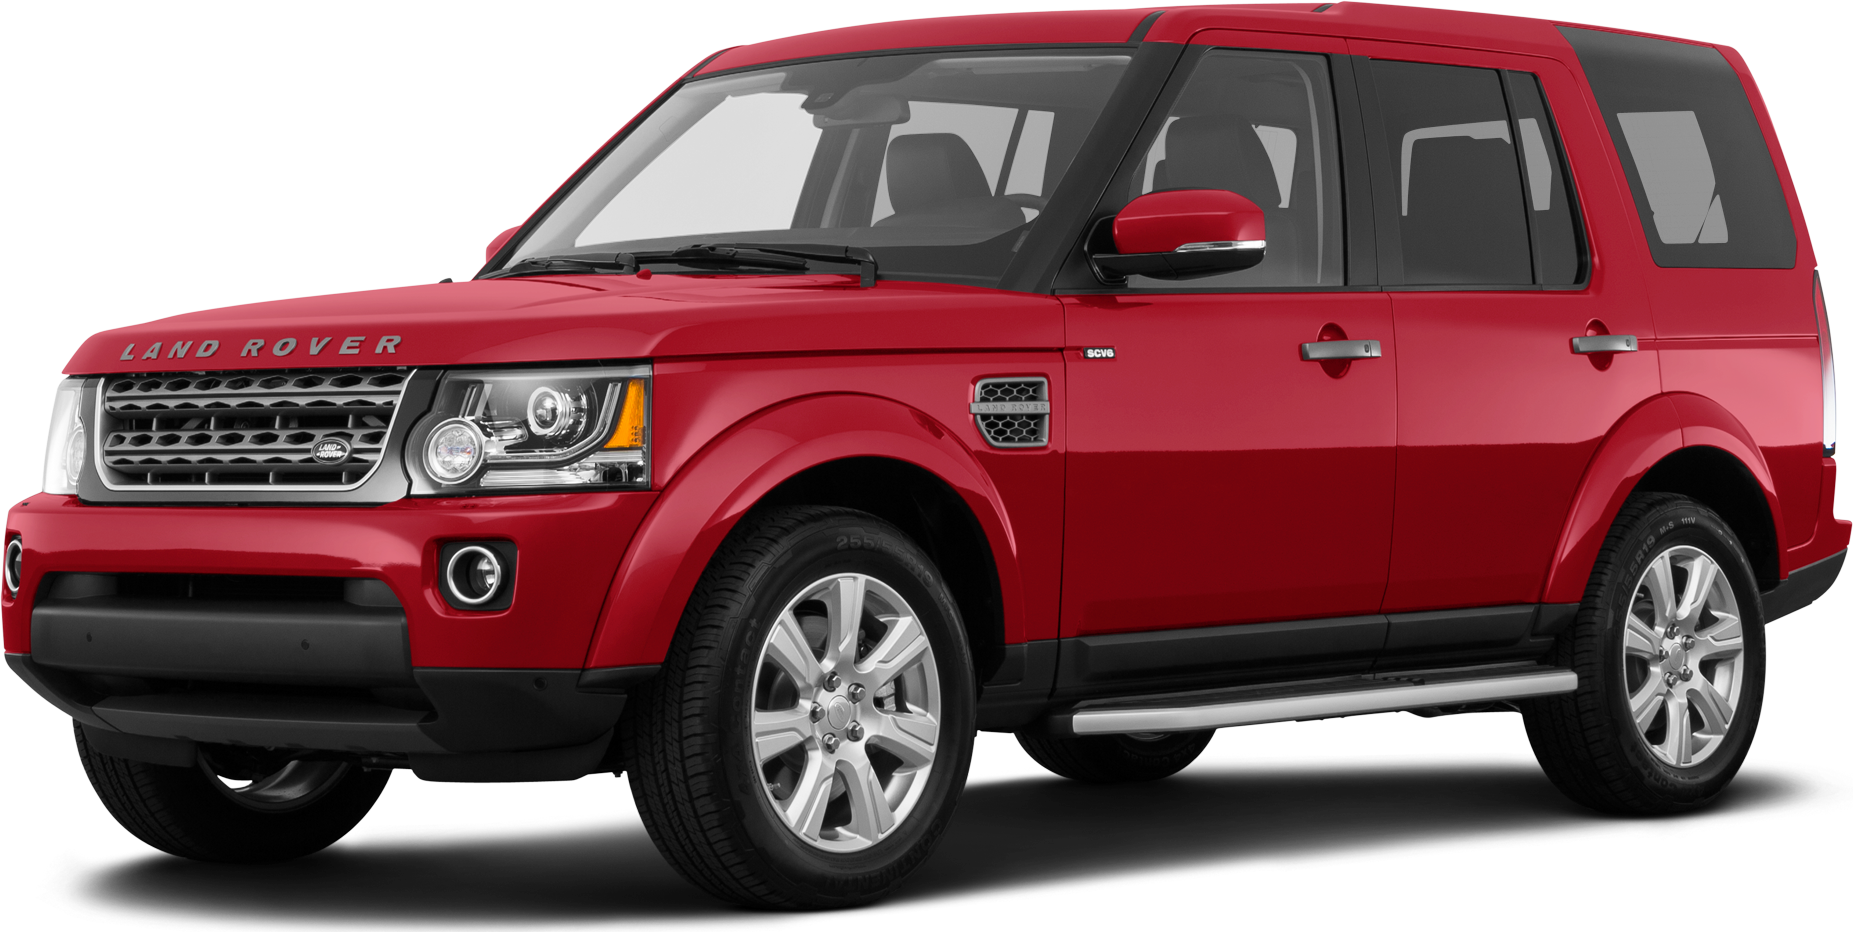 2016 Land Rover Range Rover Pricing Reviews Ratings